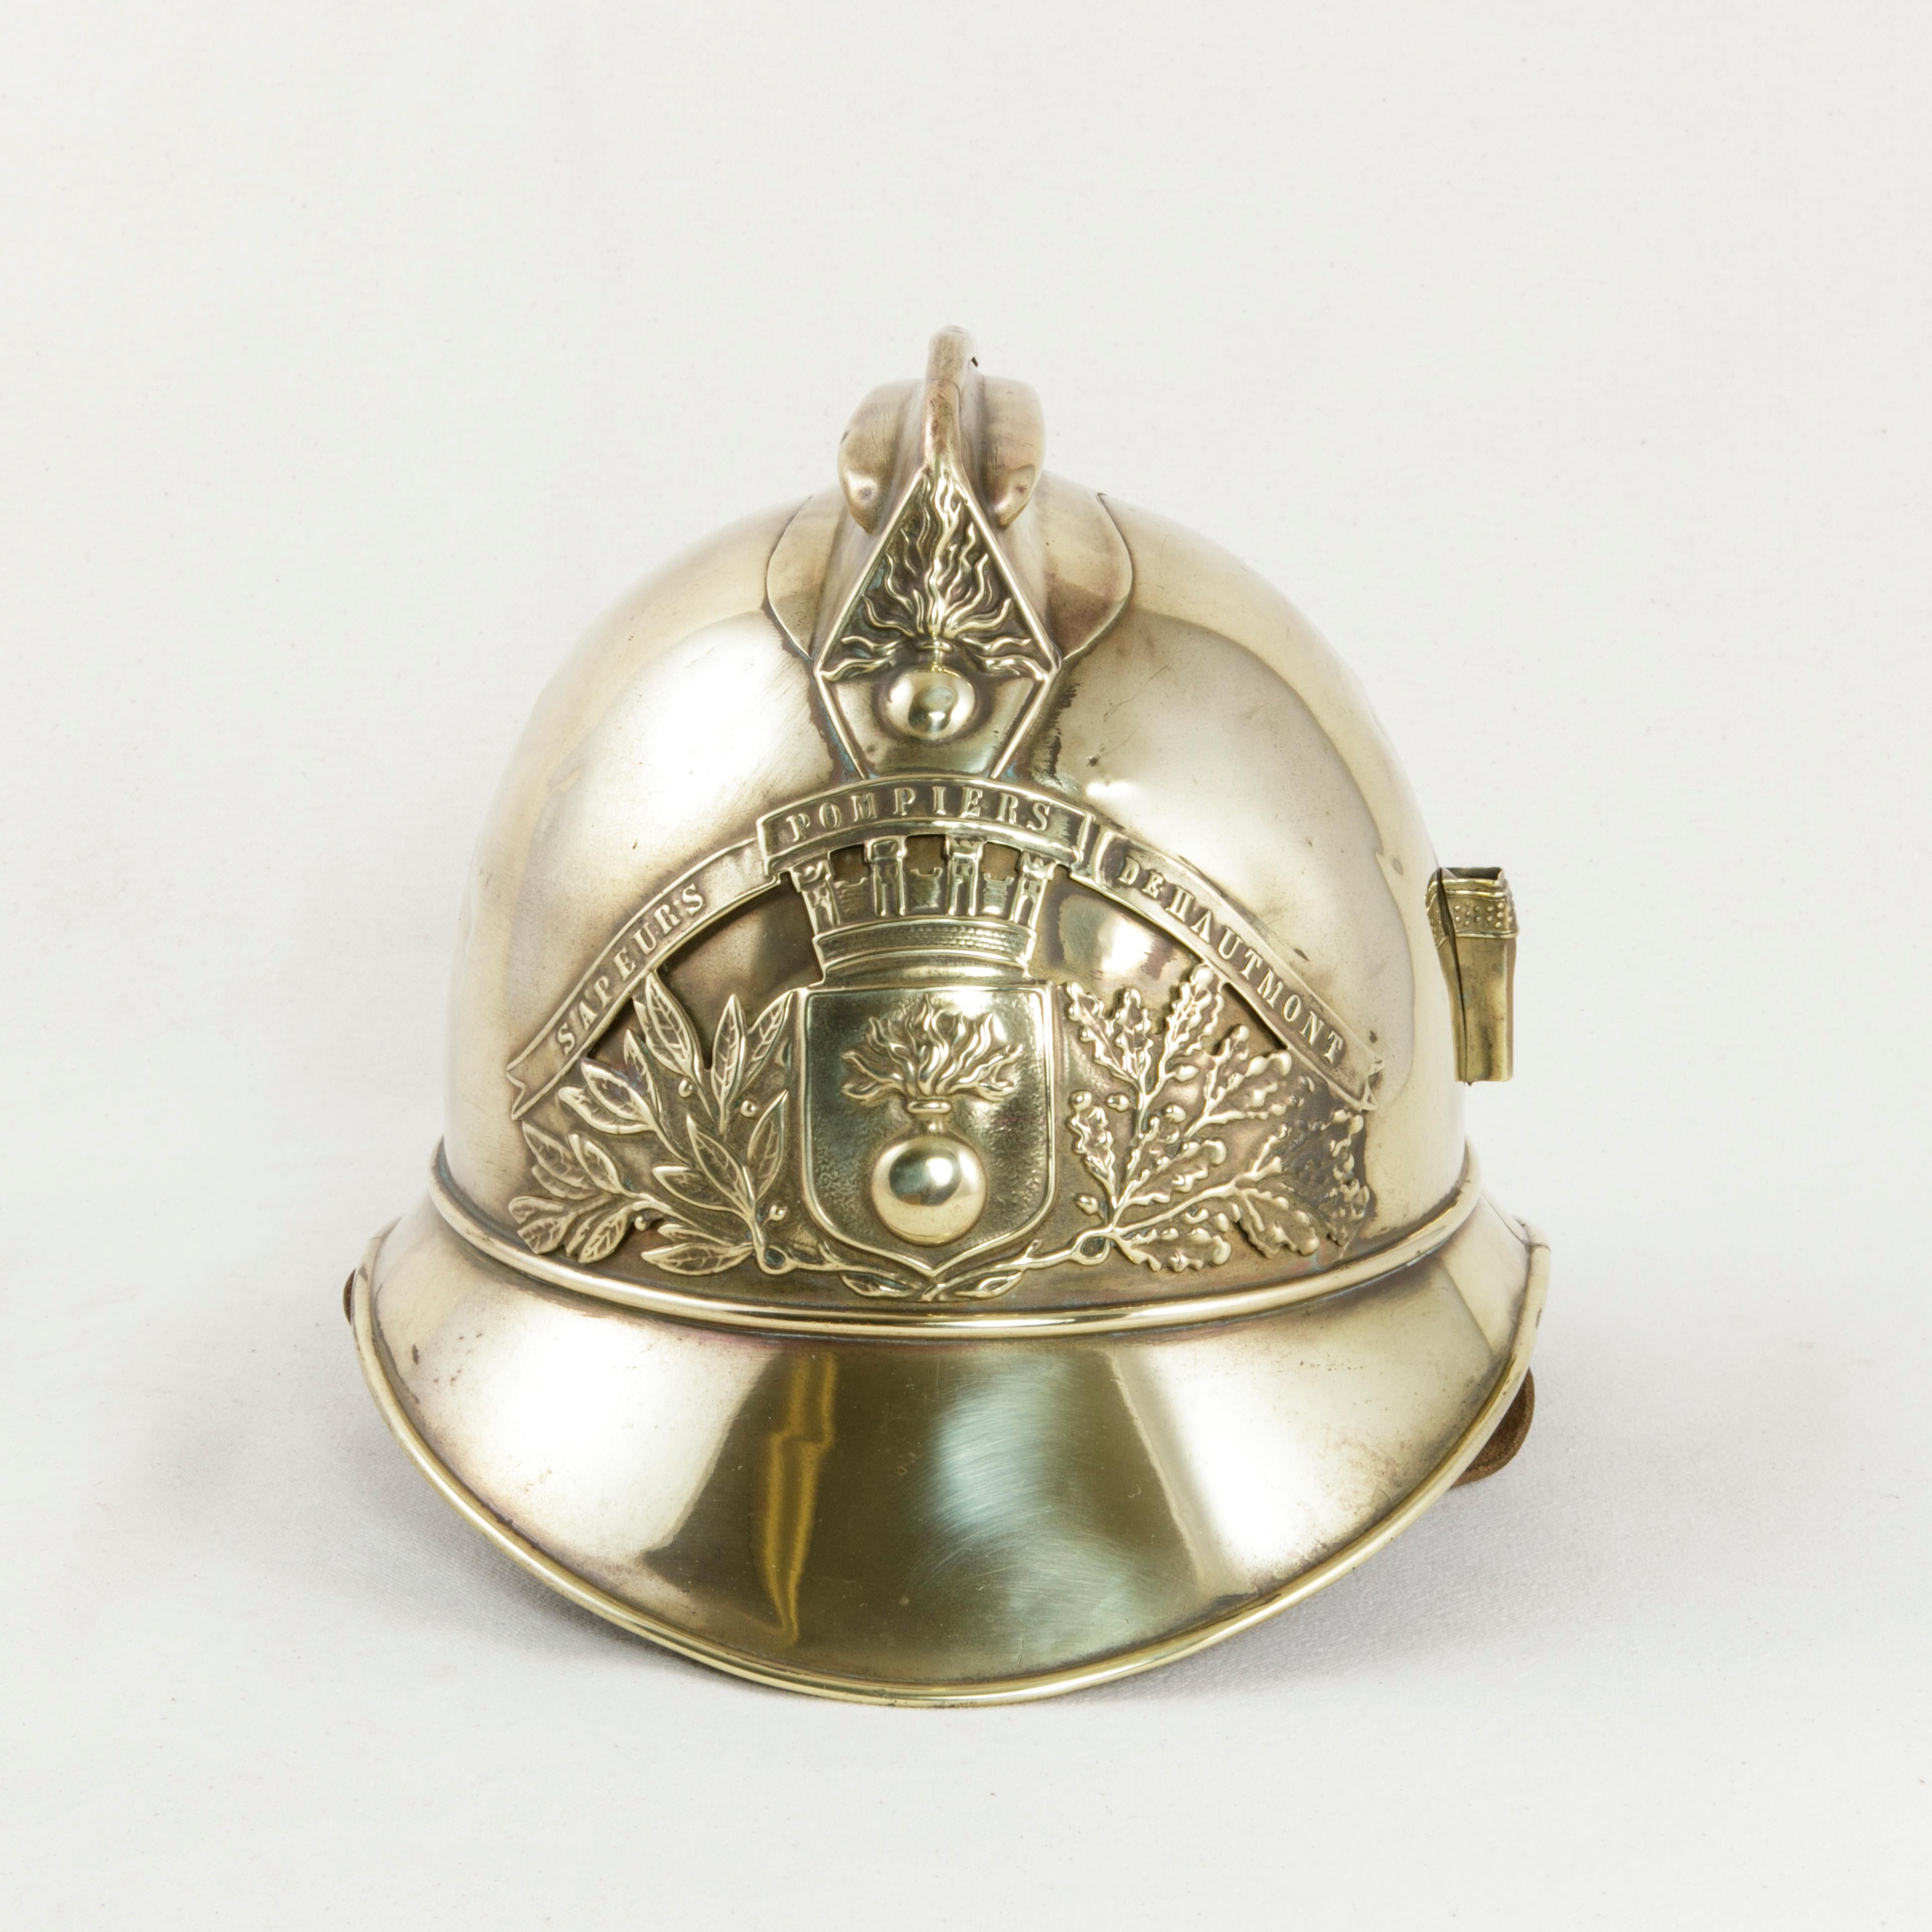 Fitted with its original leather chin strap and inner liner, this French brass fireman's helmet takes the form of a French military helmet, a style frequently seen during the First World War. The front plate of the helmet bears the Classic French